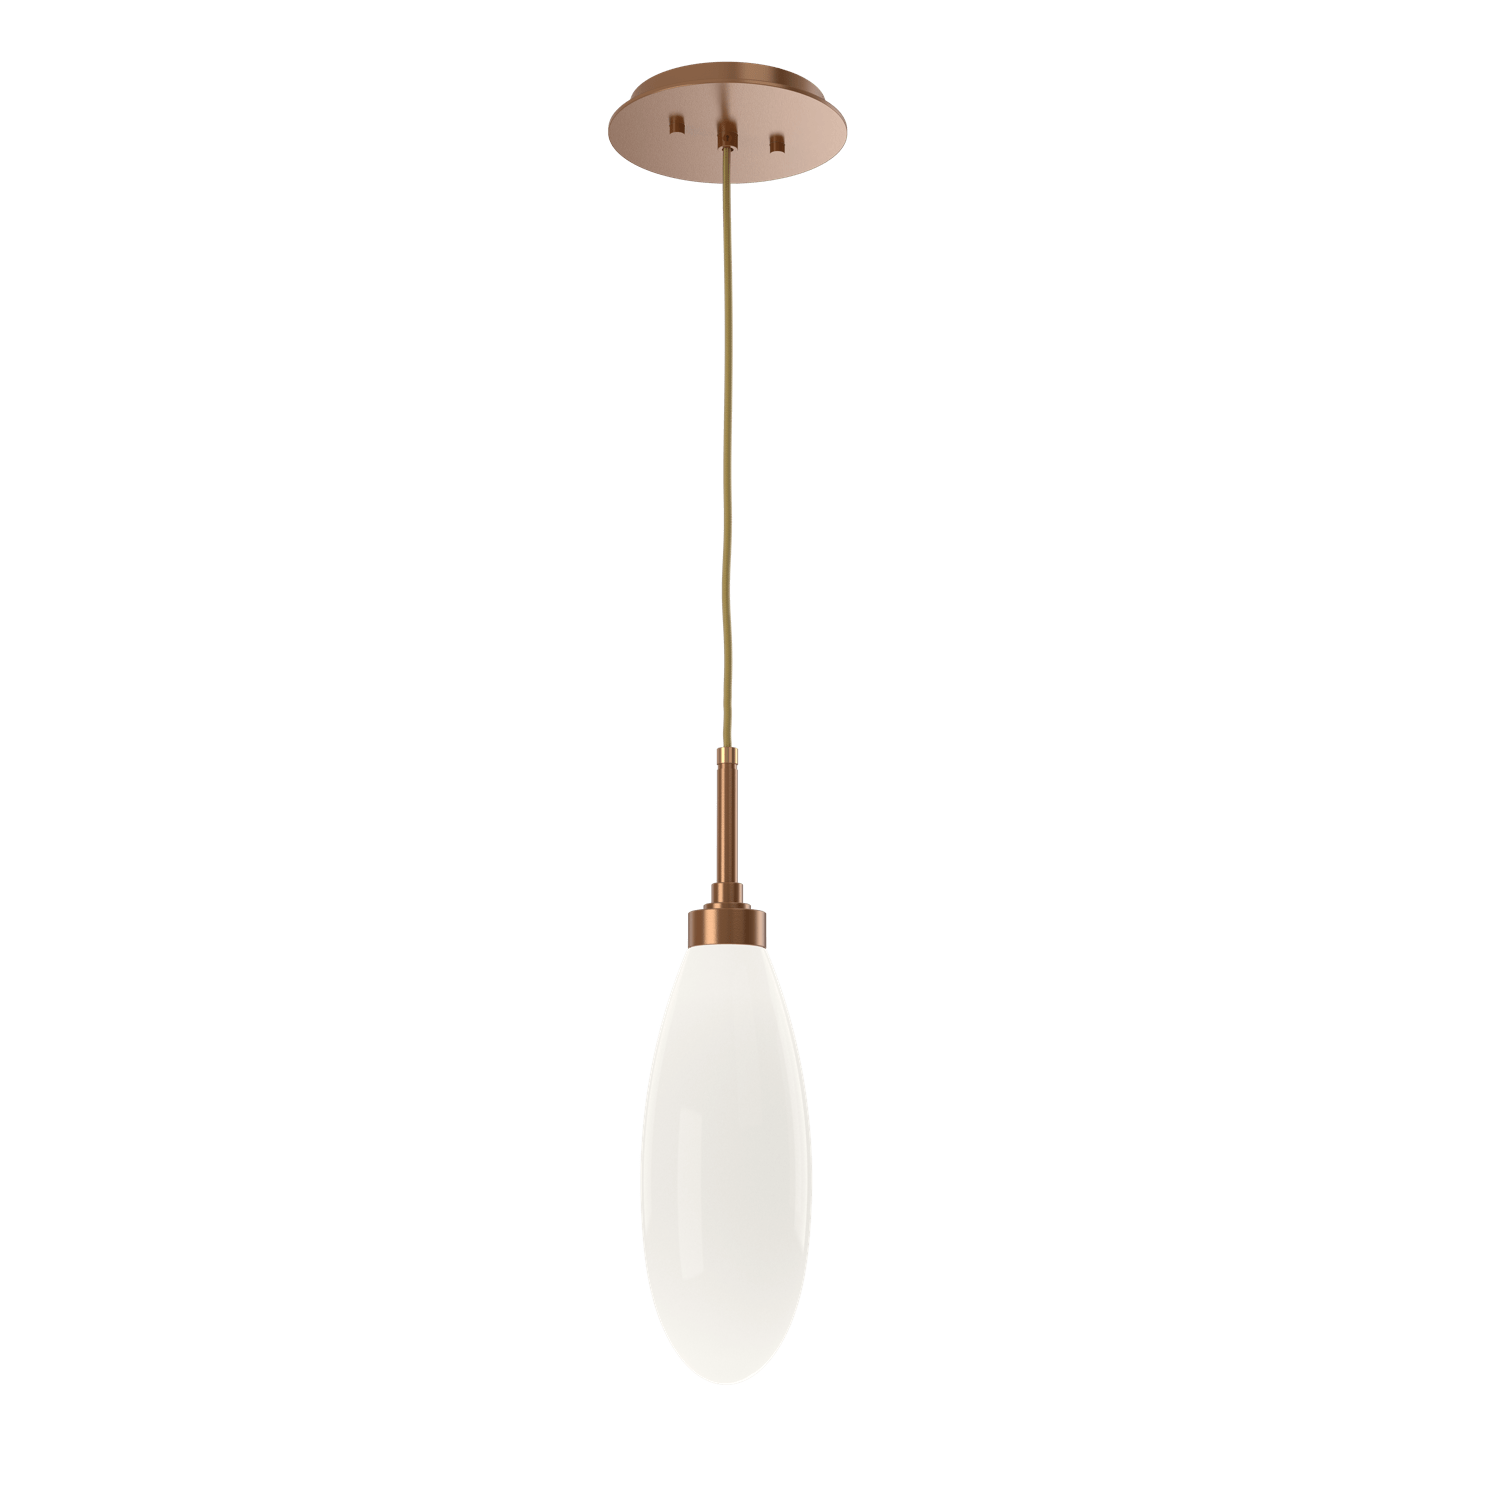 LAB0071-15-NB-WL-LL-Hammerton-Studio-Fiori-pendant-light-with-novel-brass-finish-and-opal-white-glass-shades-and-LED-lamping